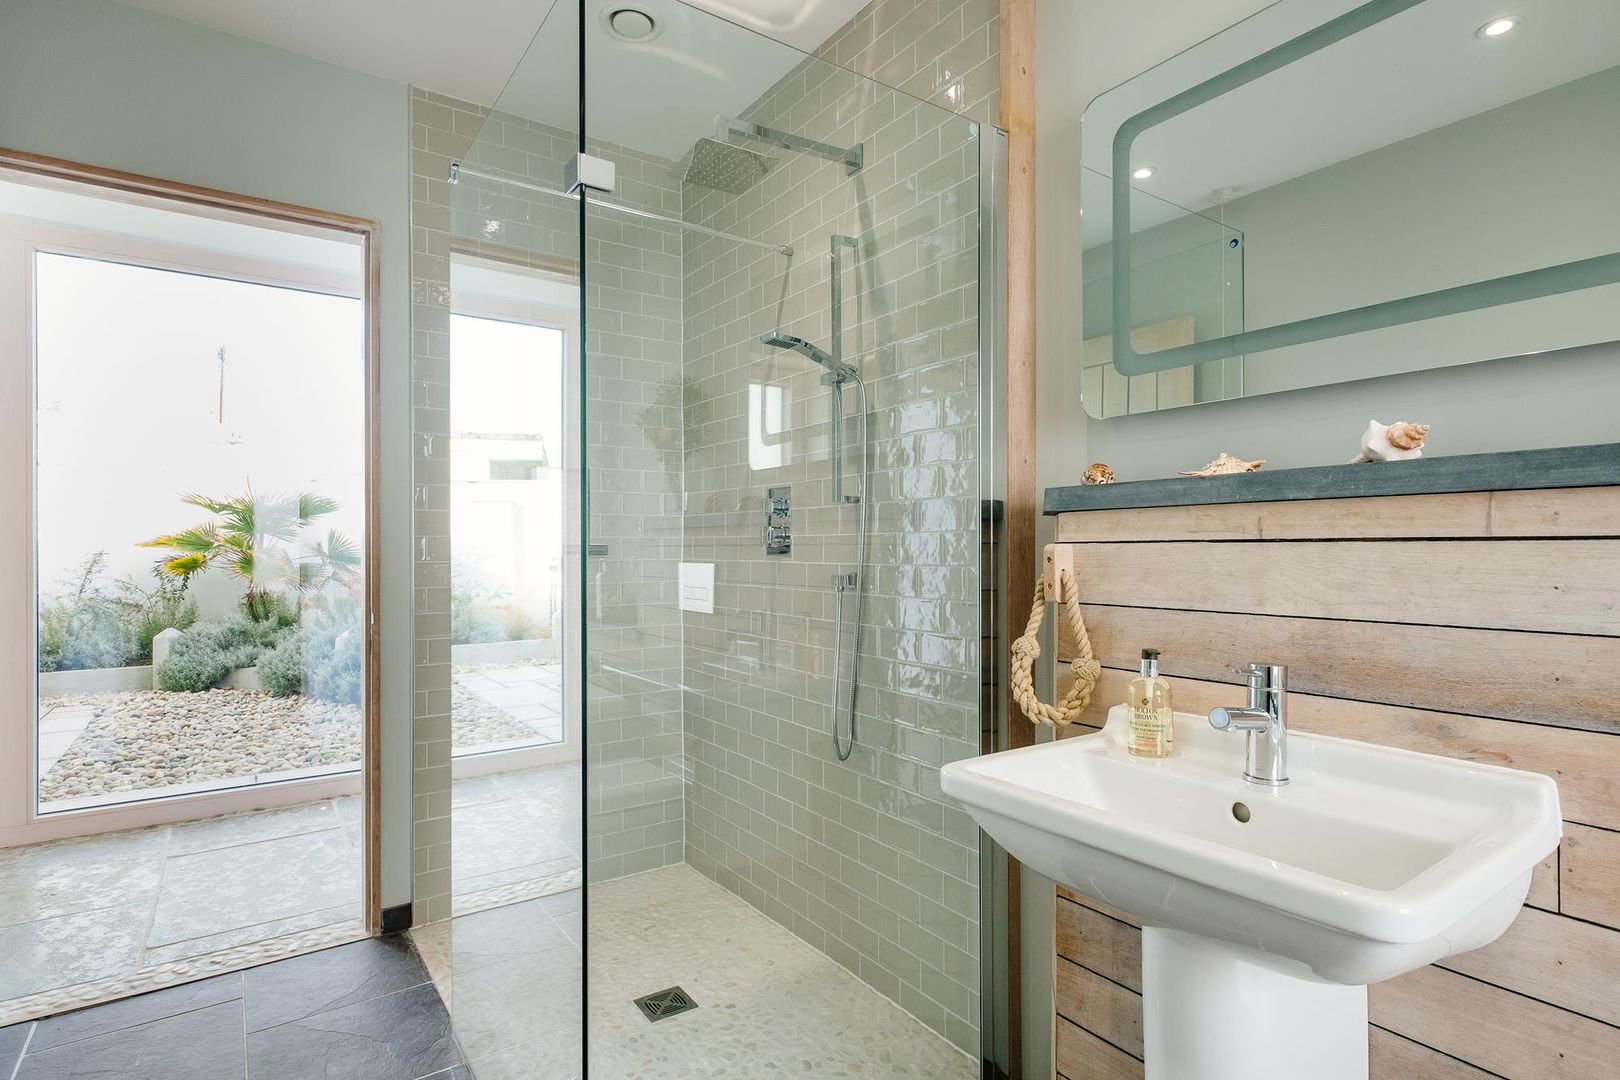 Treasure House, Polzeath | Cornwall, Perfect Stays Perfect Stays Rustic style bathroom walk-in shower,Glass screen,rustic wood,tiles,bathroom,wall hung,wet room,holiday home,beach home.